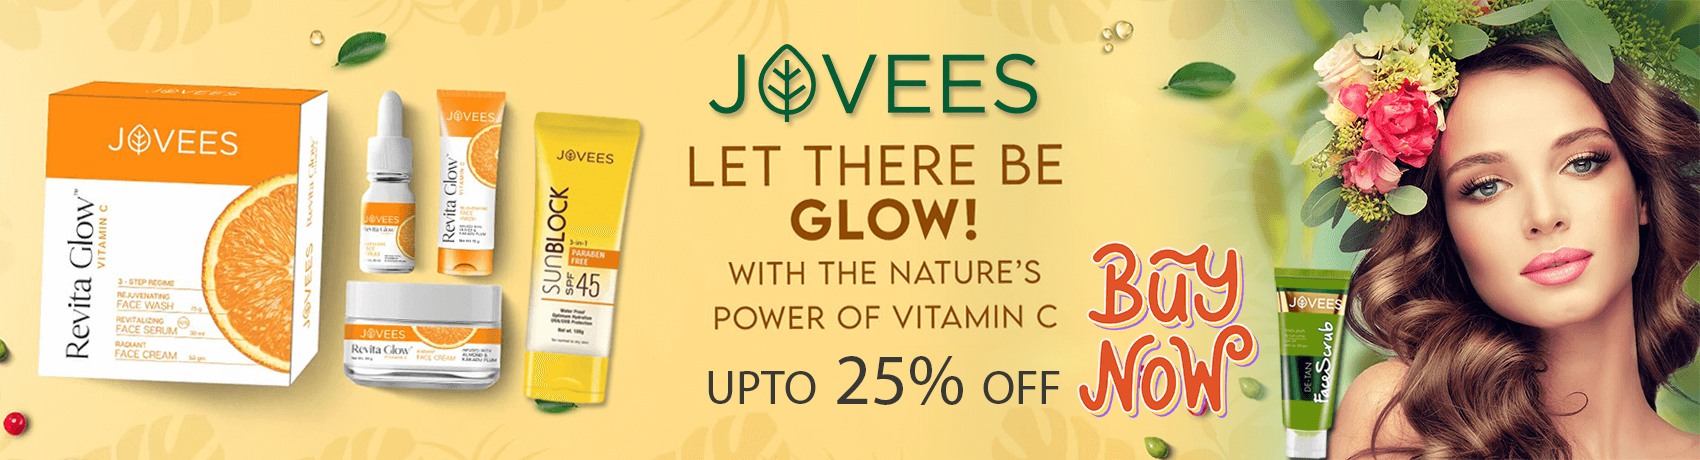 Jovees best skincare products upto 25% off online on Beuflix